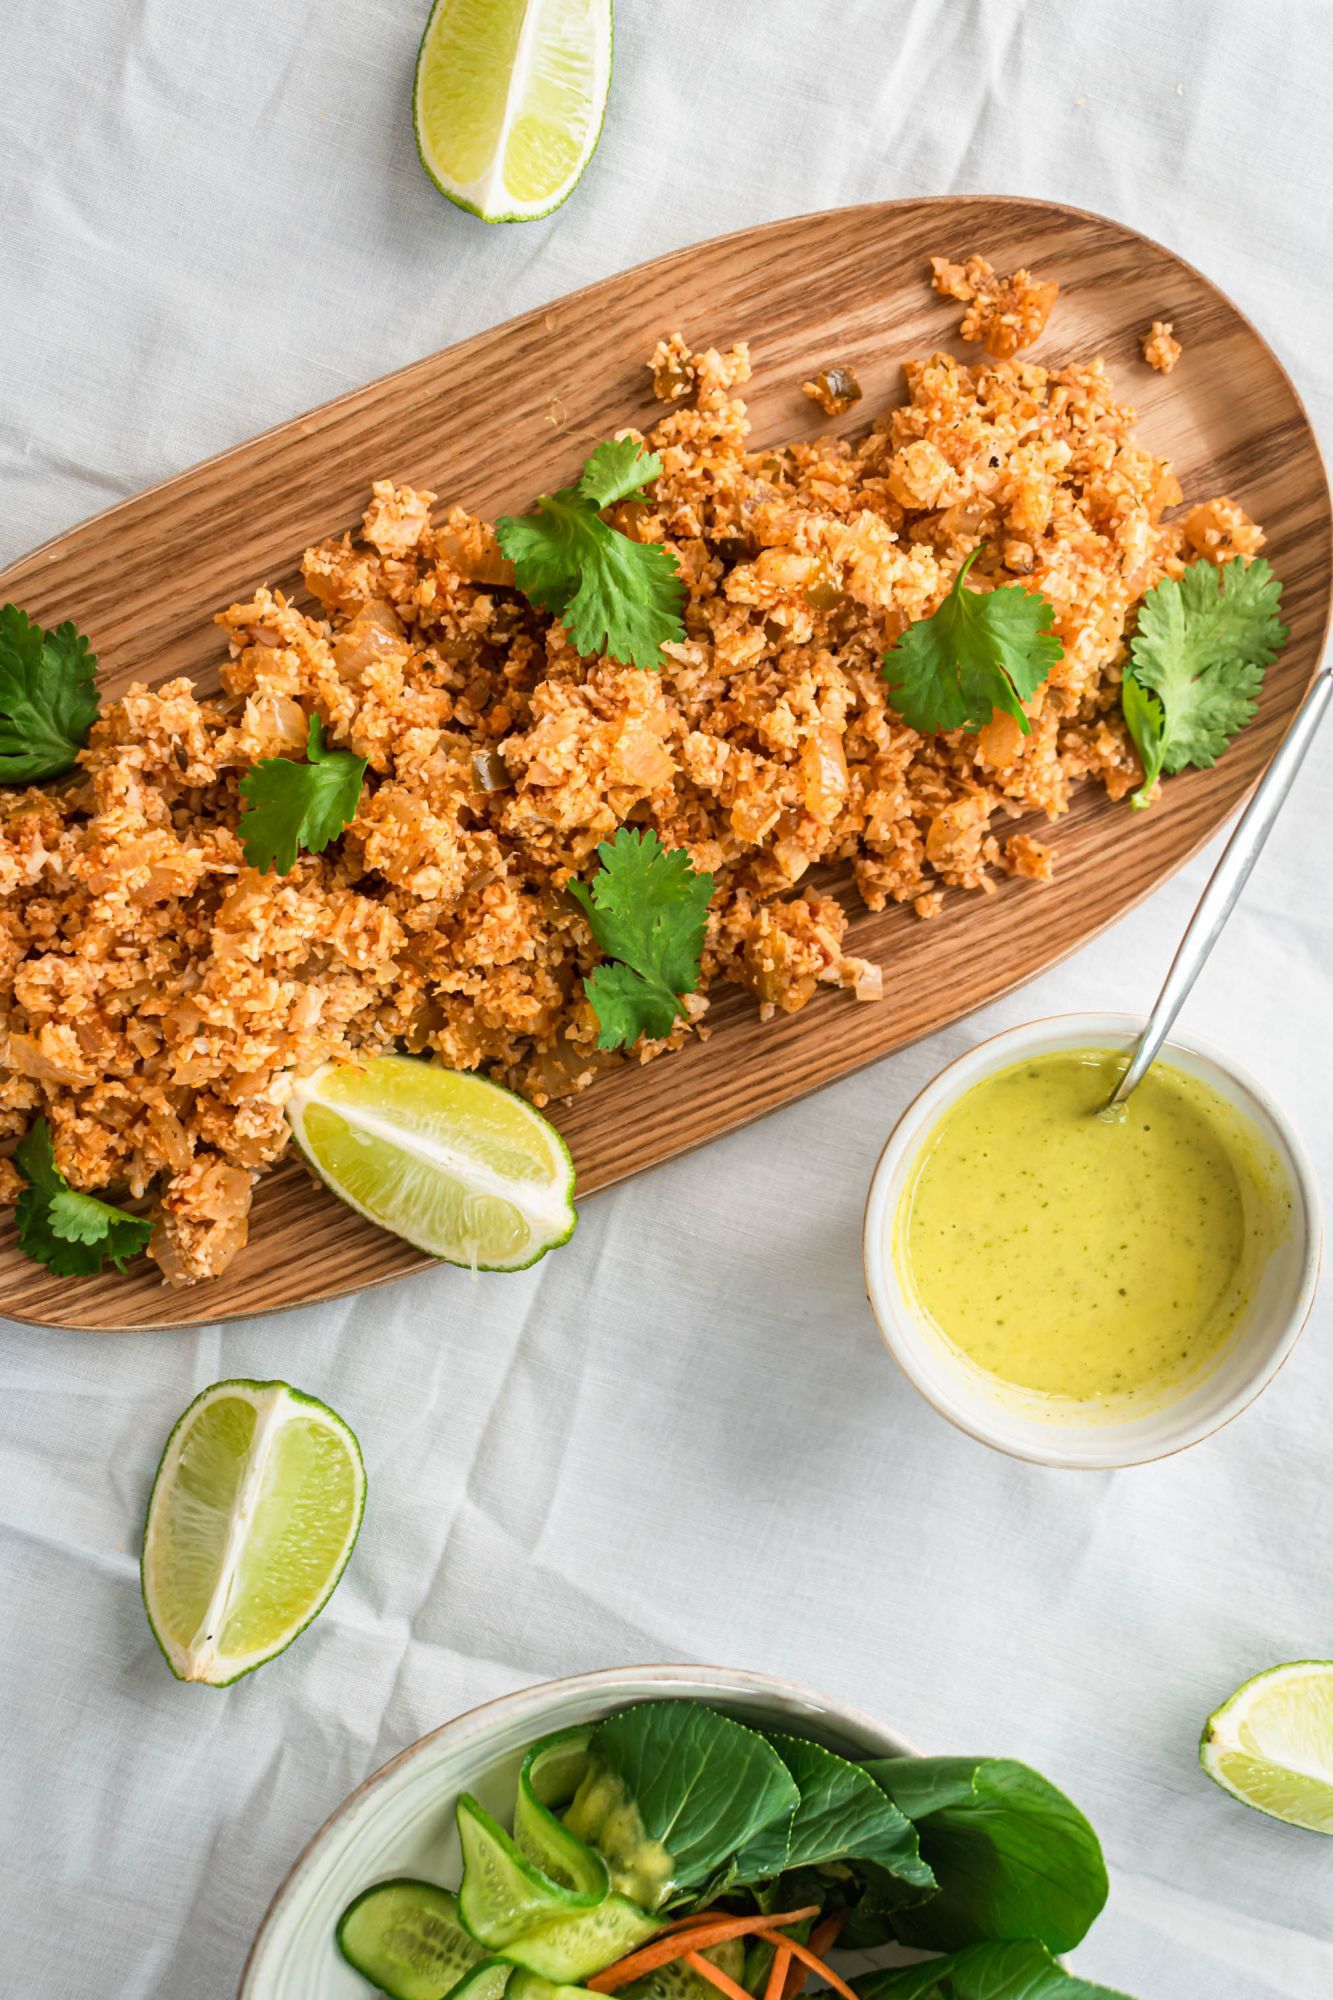 Low carb Mexican cauliflower with spice, onion, garlic, and tomato on a wooden plate with lime and cilantro.